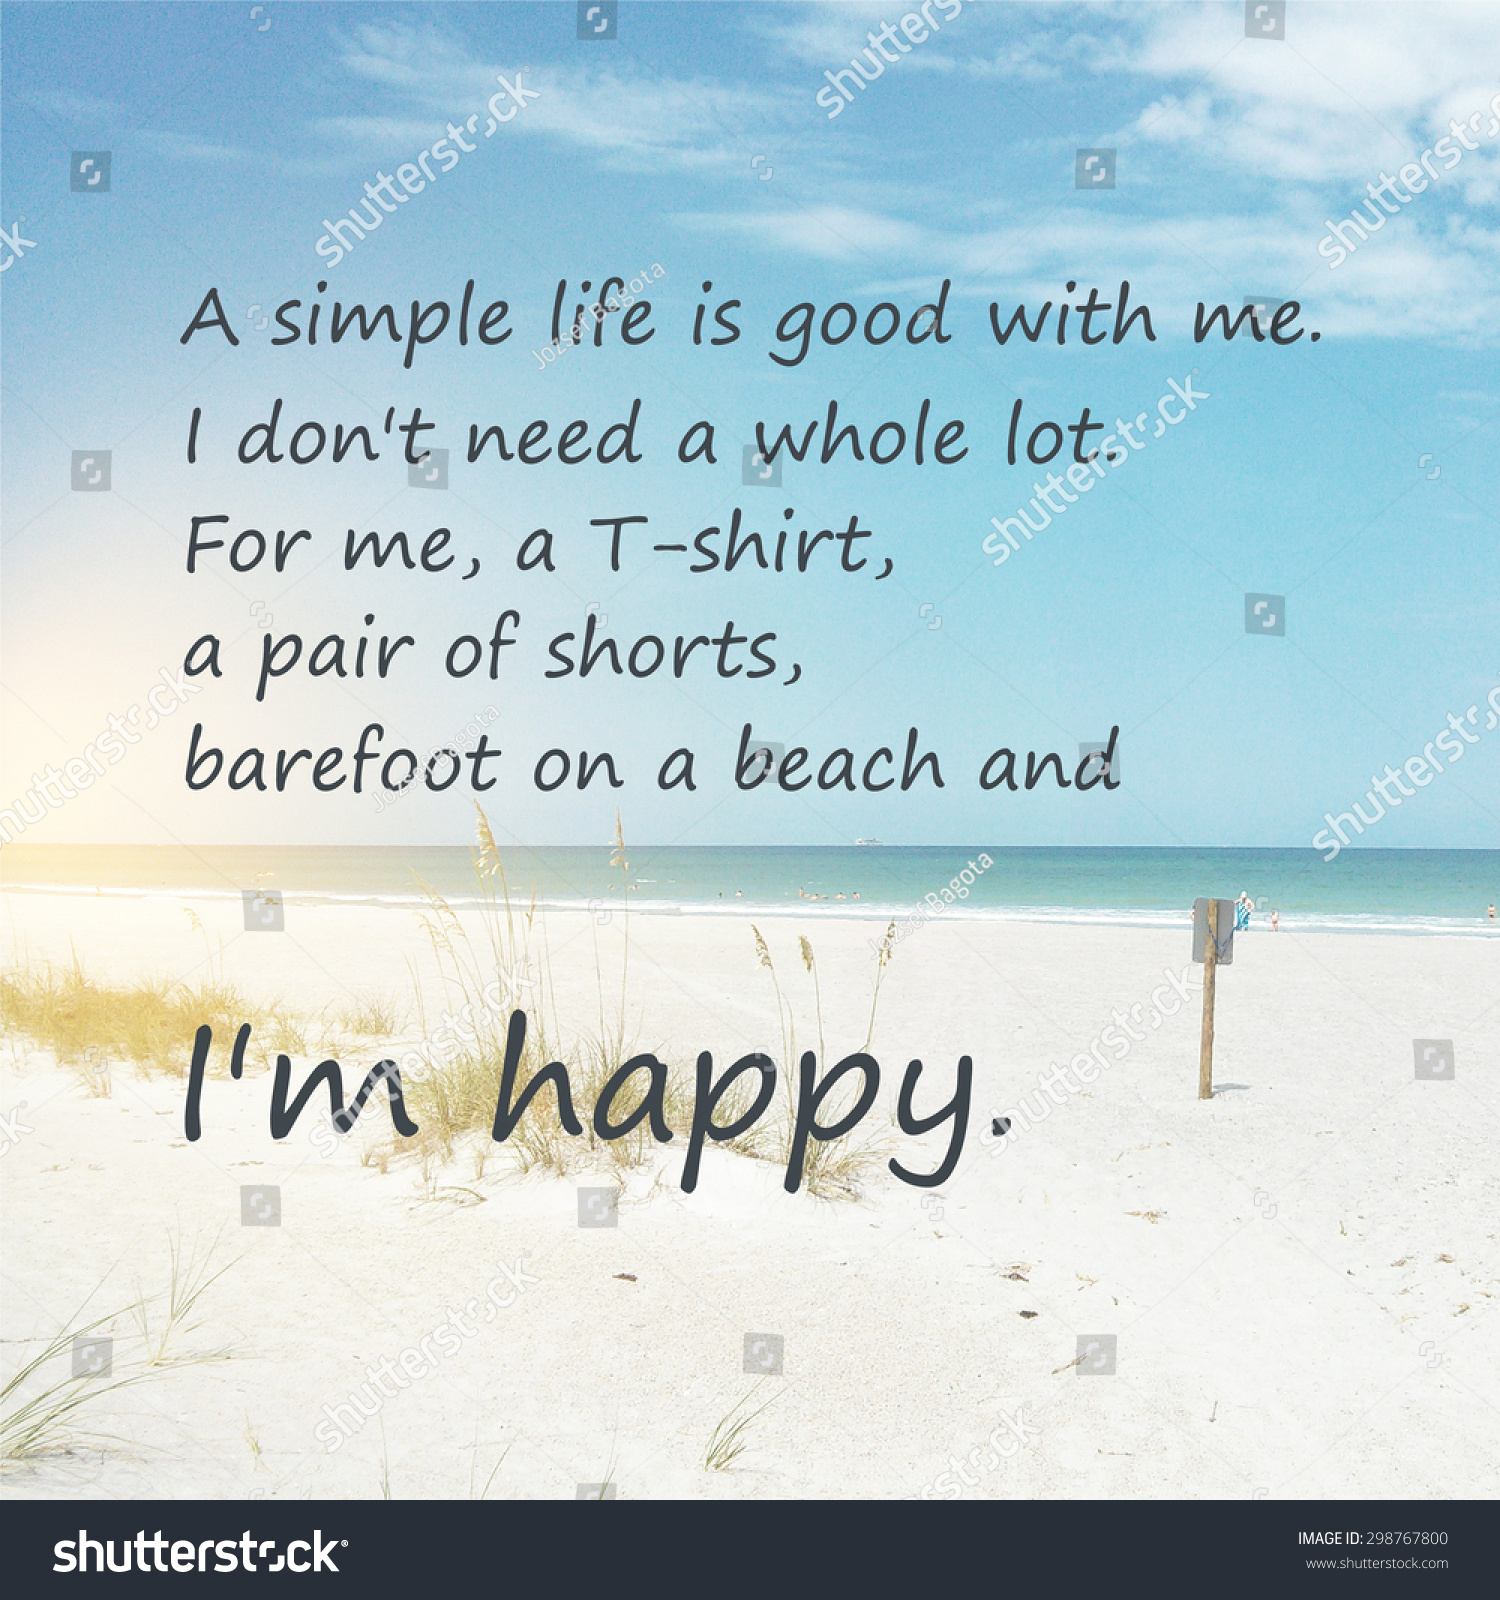 Inspirational quote "A simple life is good with me I don t